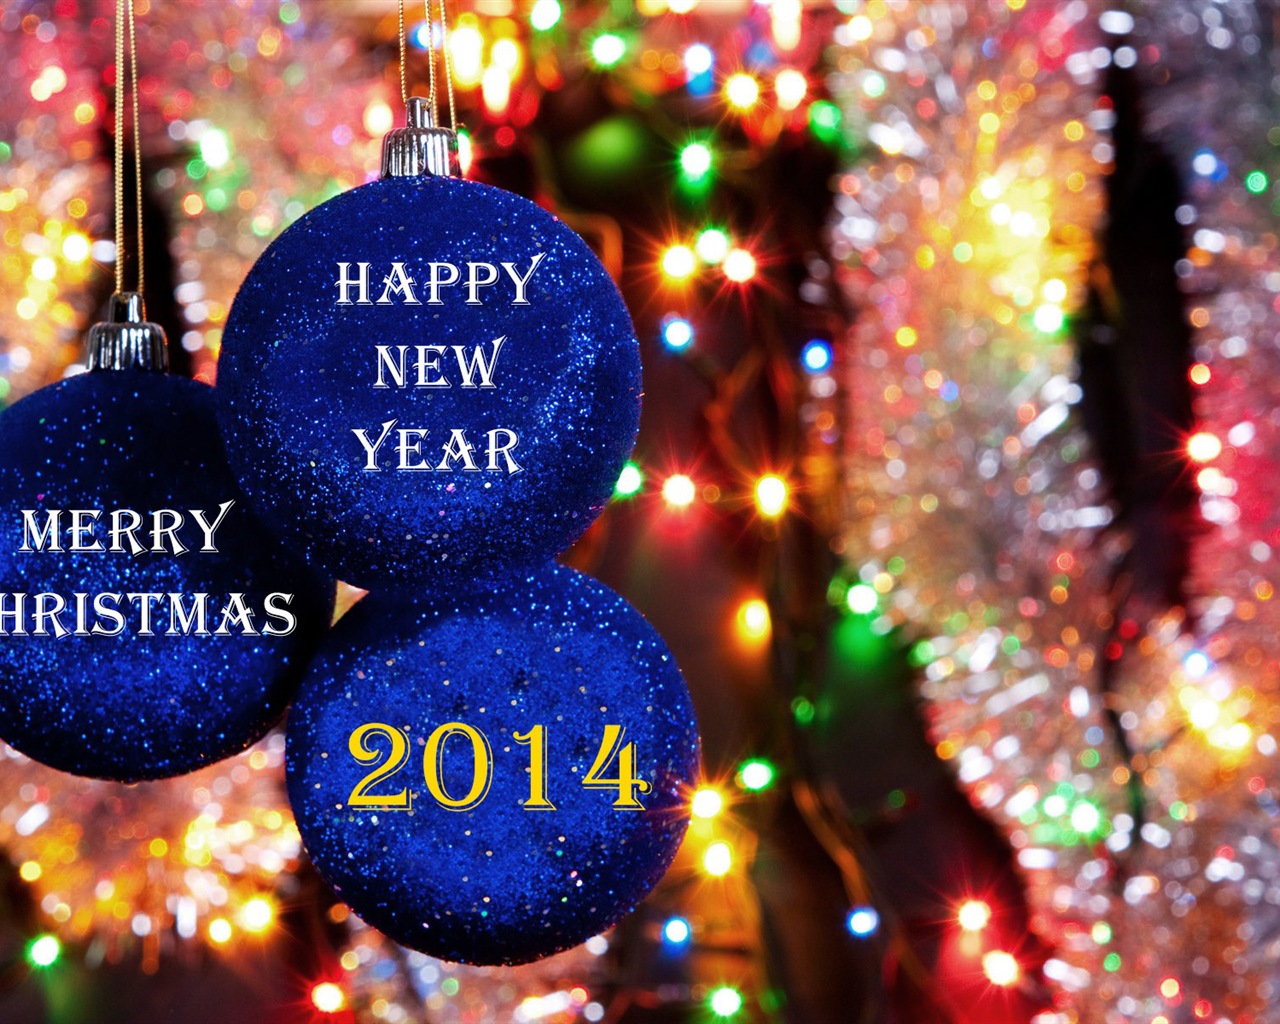 2014 New Year Theme HD Wallpapers (2) #6 - 1280x1024